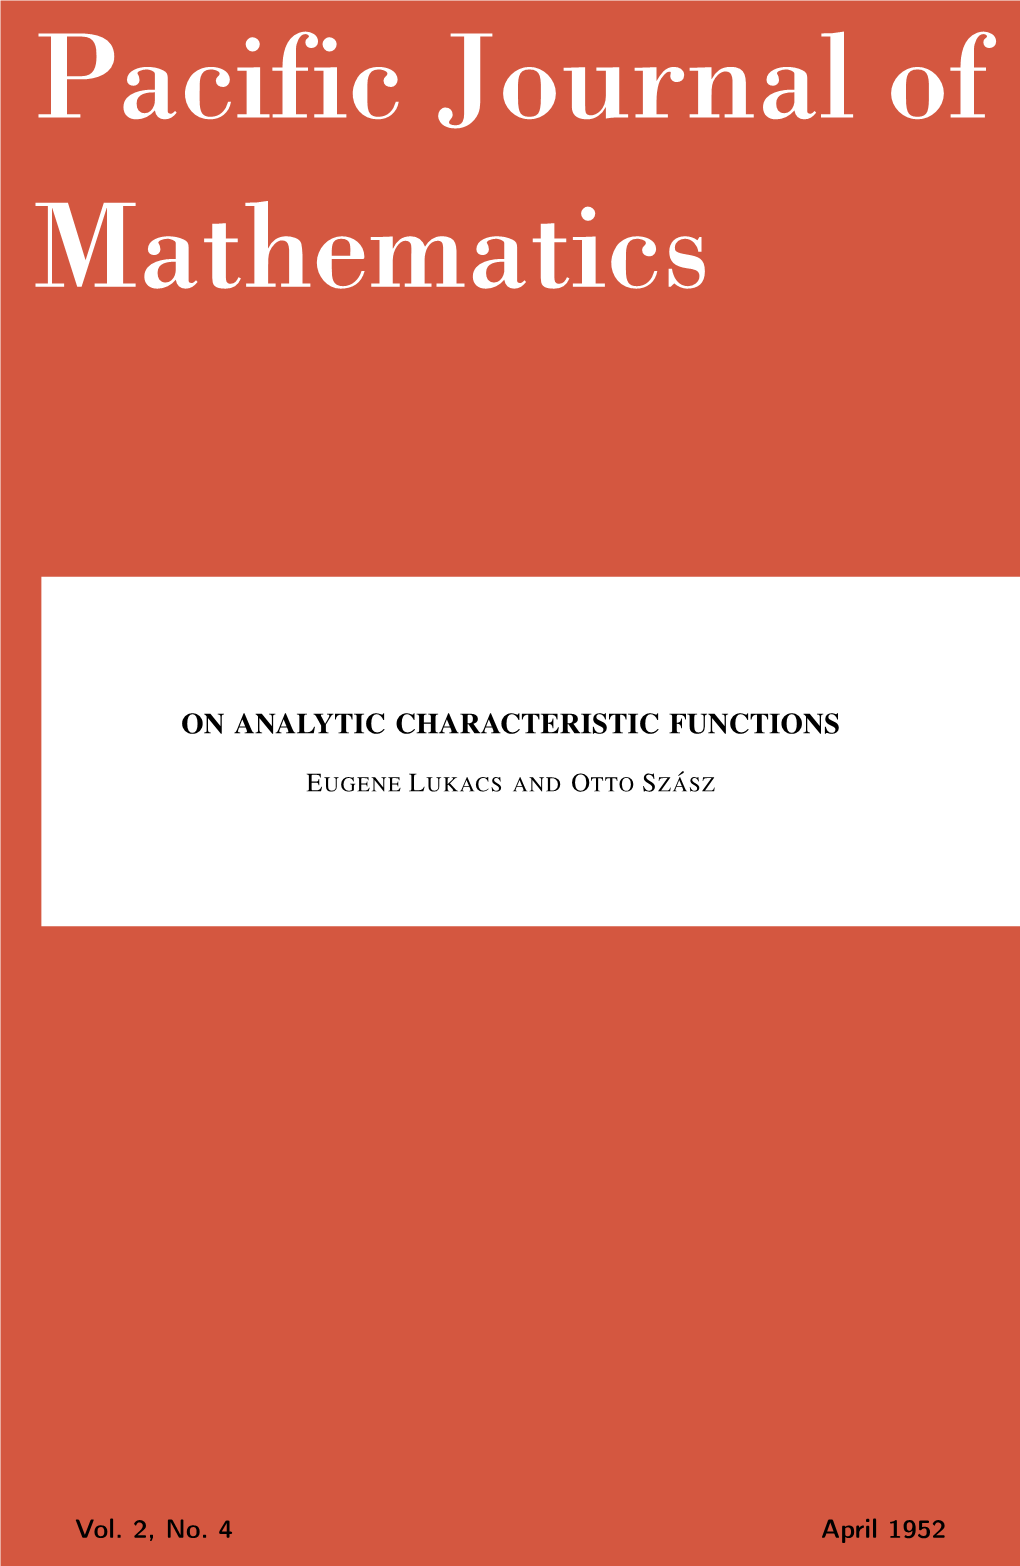 On Analytic Characteristic Functions